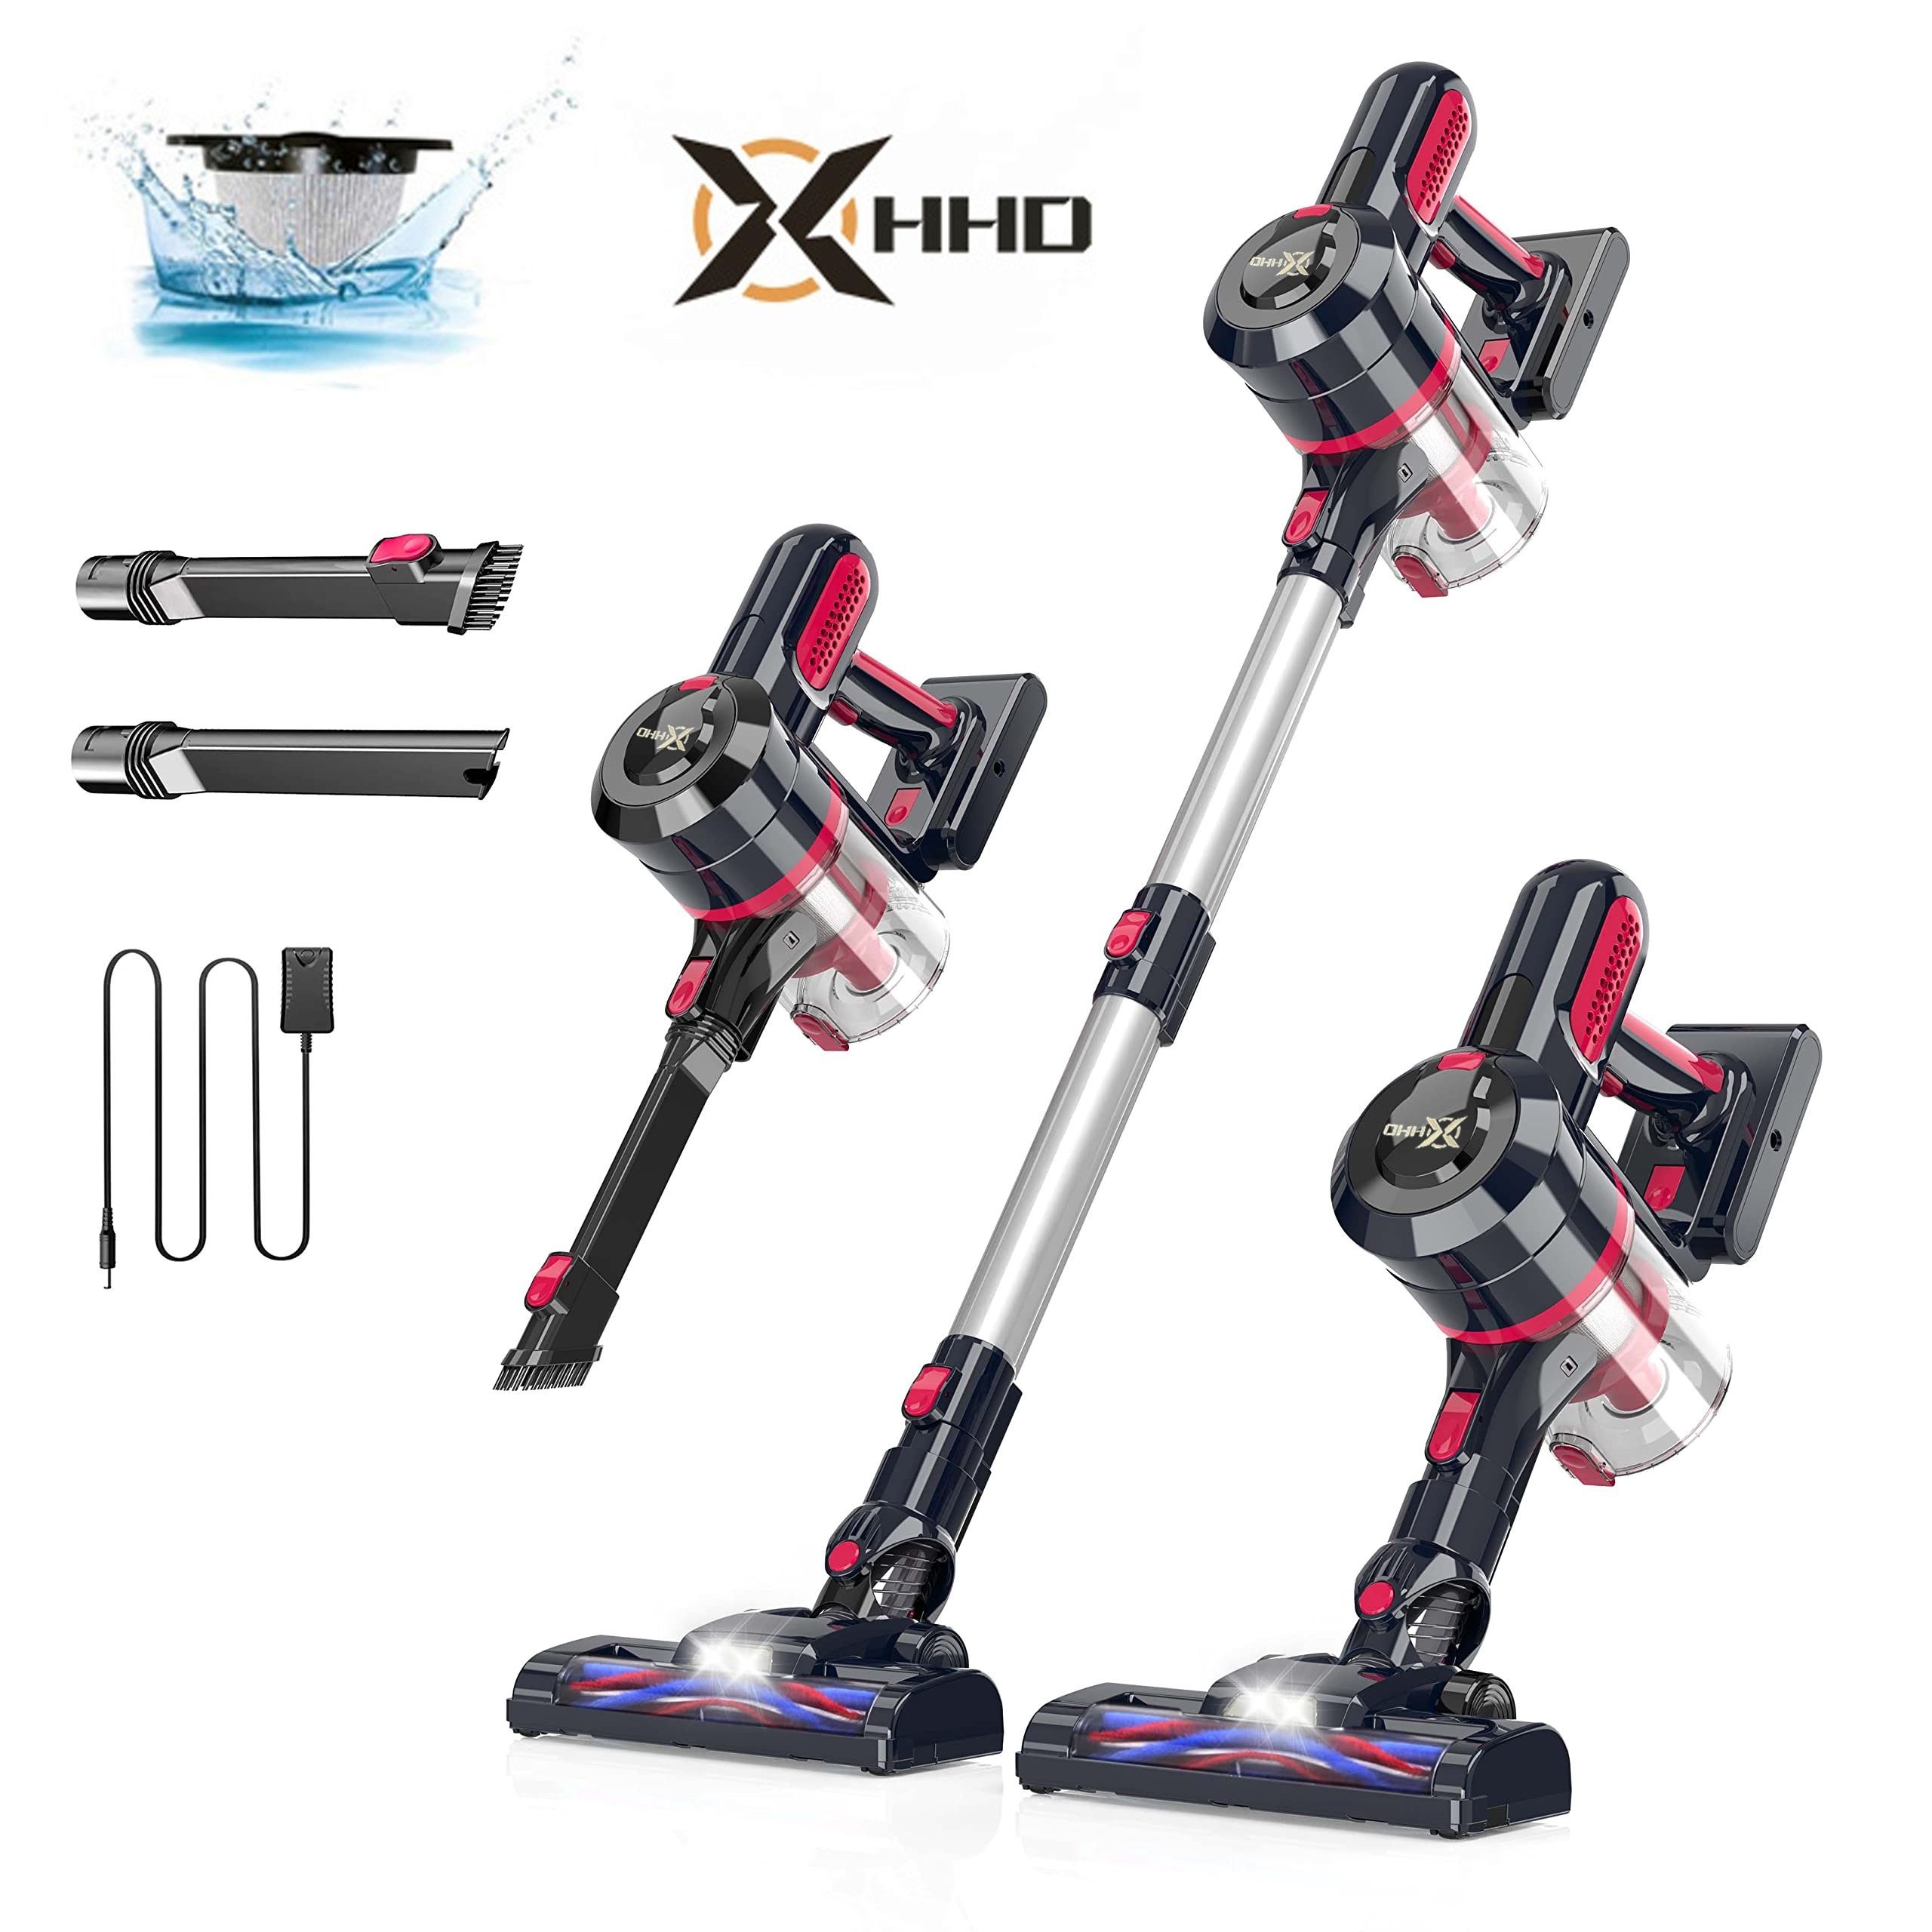 

Cordless Vacuum Cleaner, 200w Rod Vacuum Cleaner With 25kpa Strong Suction Force And 2200mah Strong Lithium Battery, Running For Up To 35 Minutes, Suitable For Carpets And Floors, Pet Hair